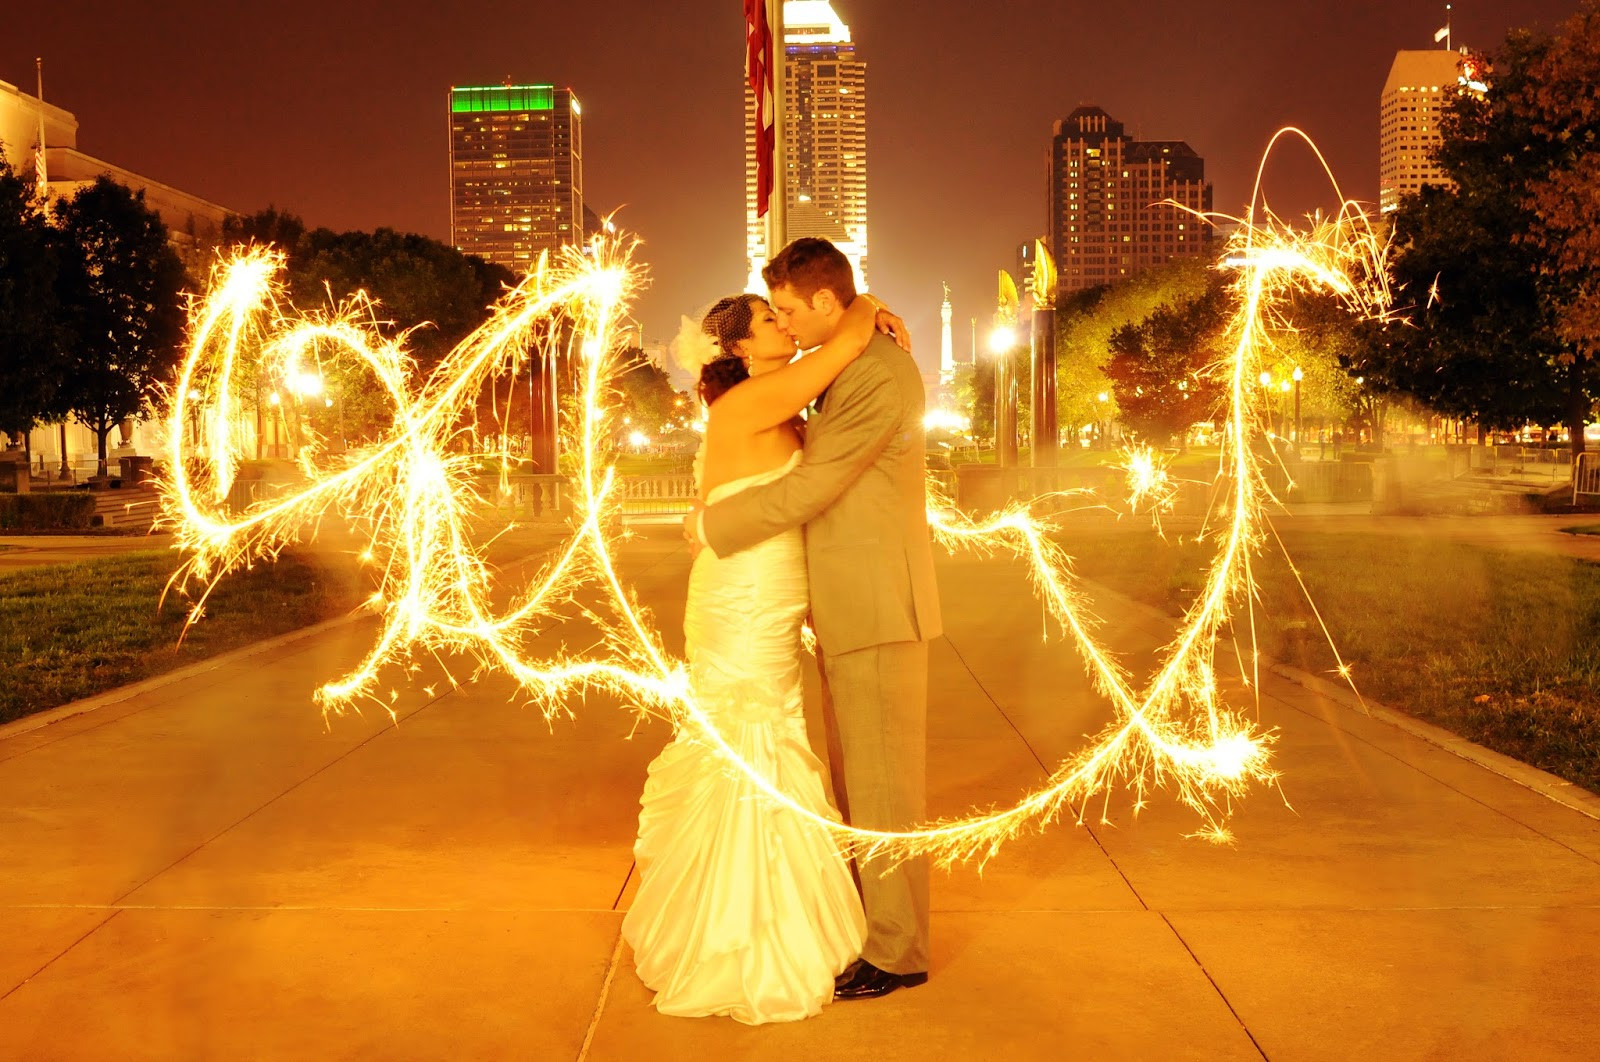 How To Photograph Wedding Sparklers
 ViP Wedding Sparklers Writing With Wedding Sparklers